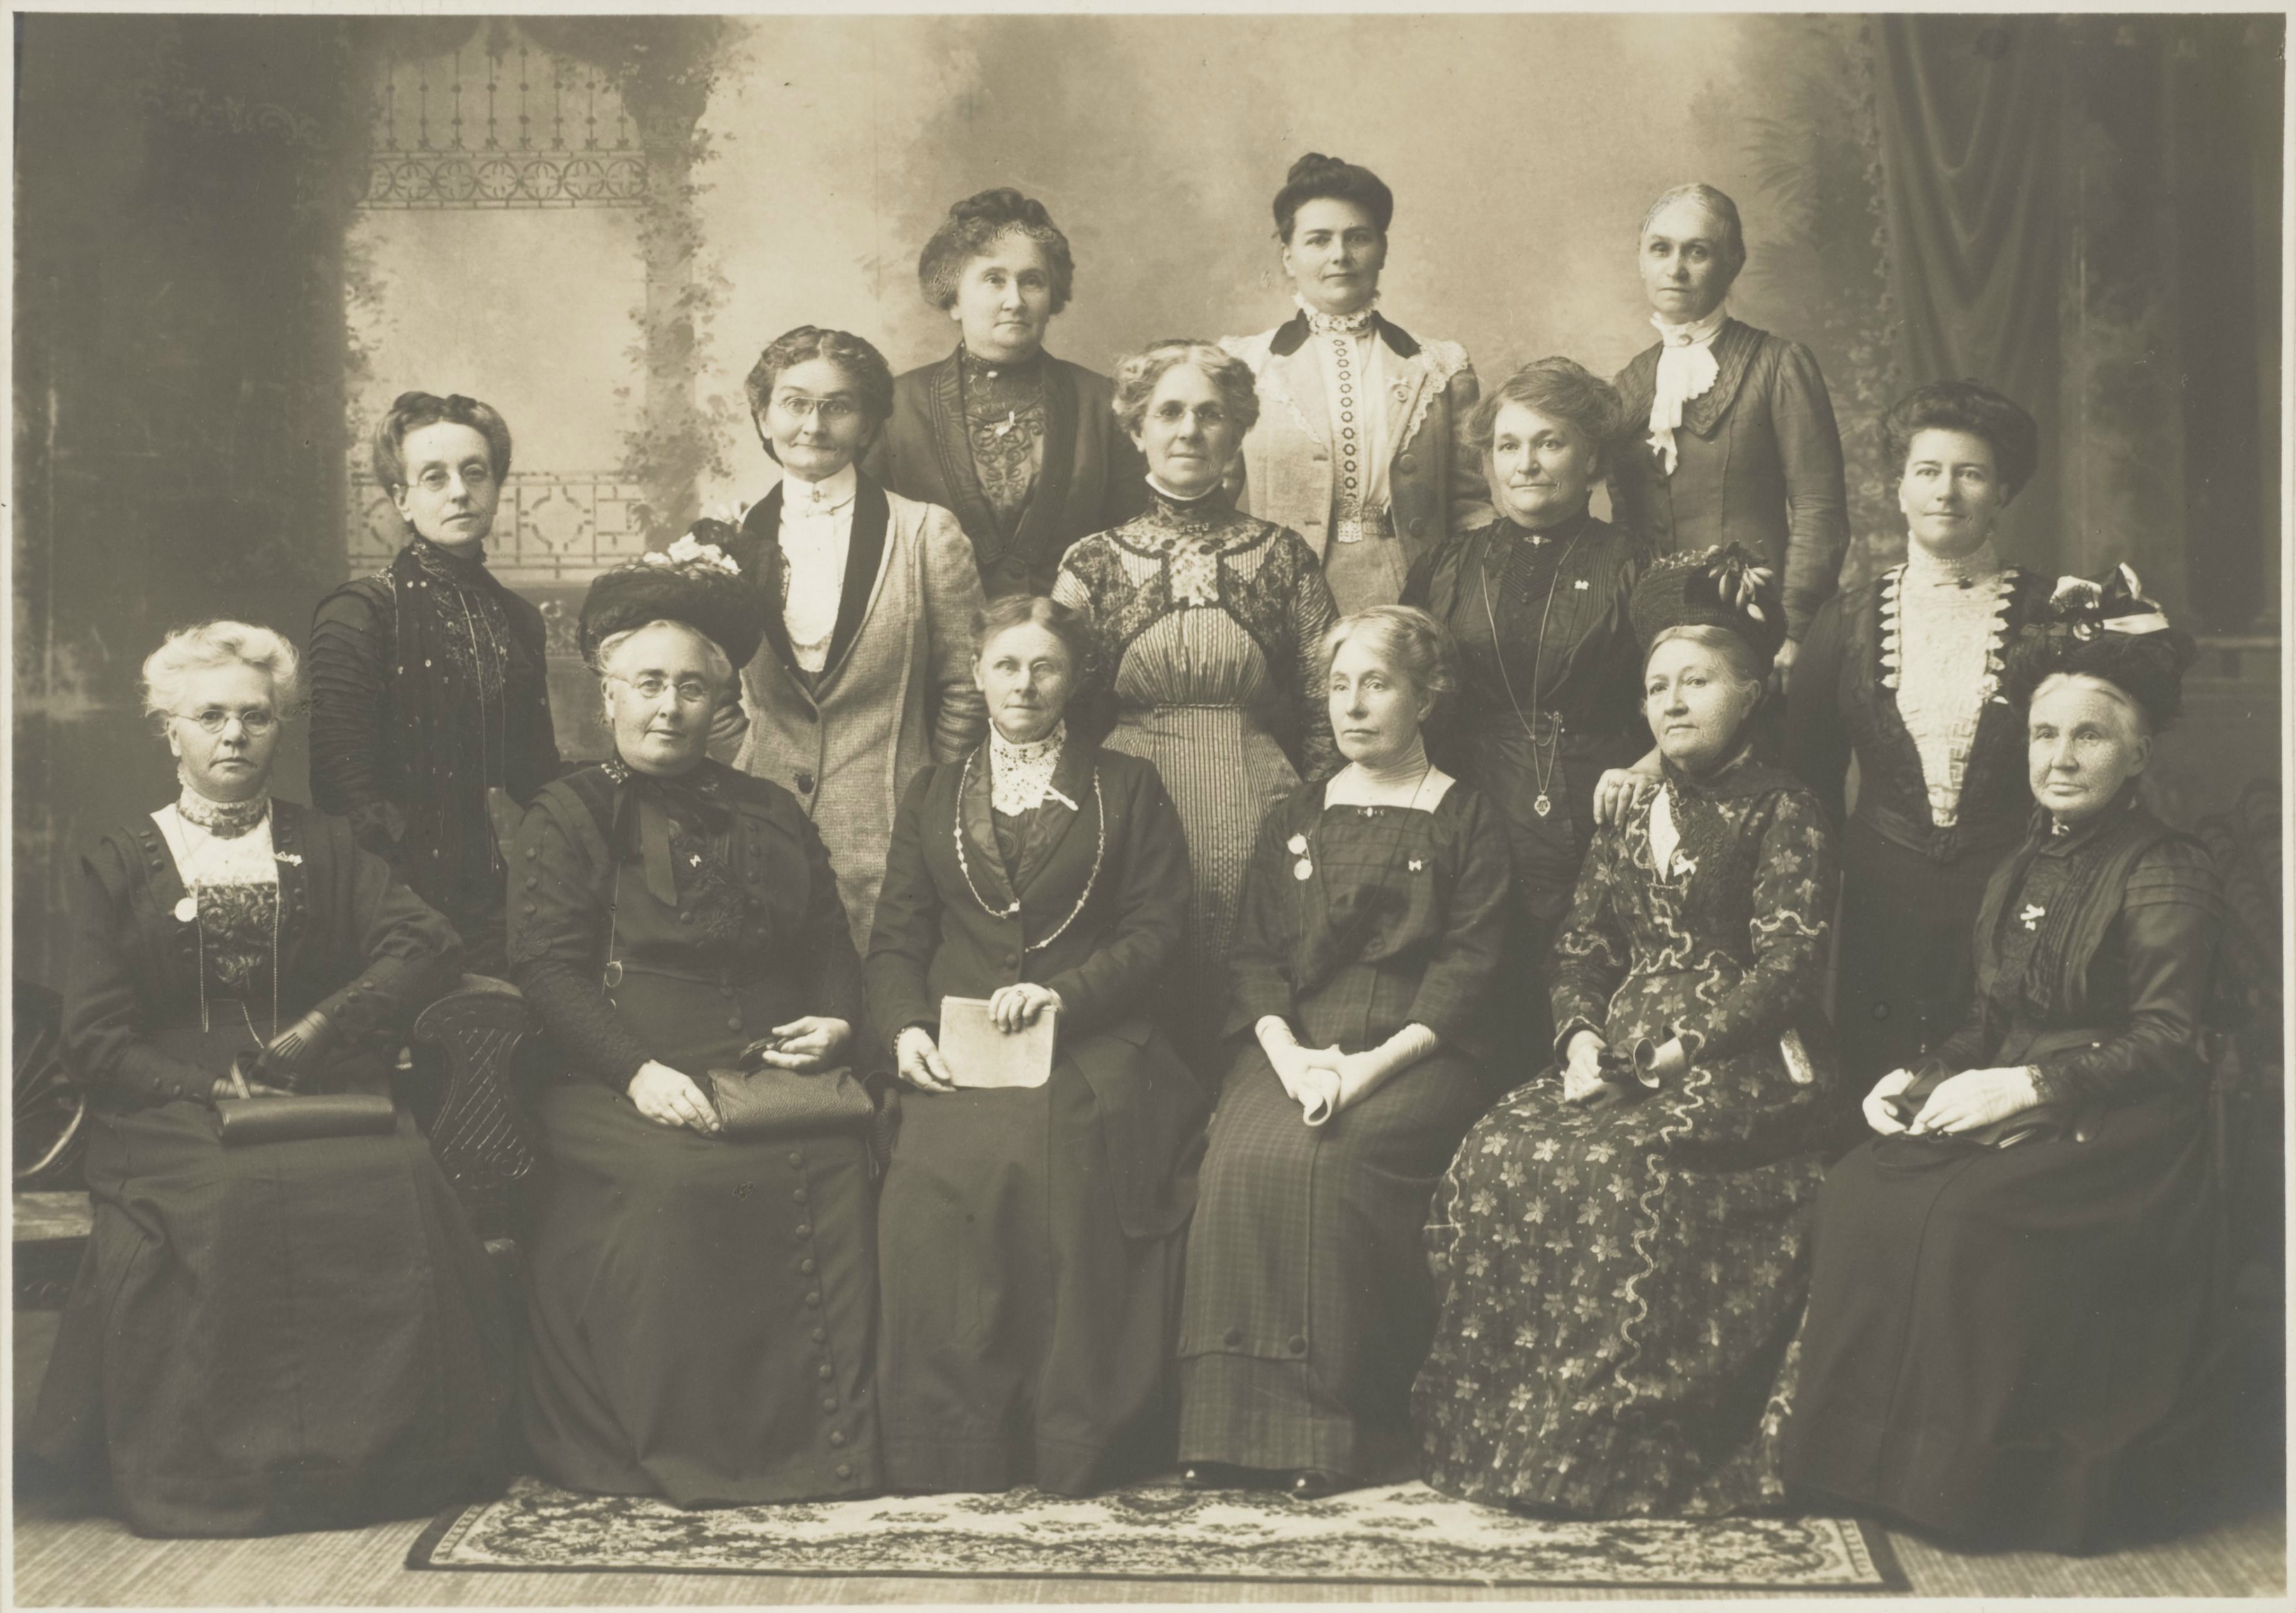 Fourteen delegates who attended First Convention Melbourne 1891 and Eighth Convention 21 years later, in Brisbane, Woman’s Christian Temperance Union, 19122001.0085.00071. 